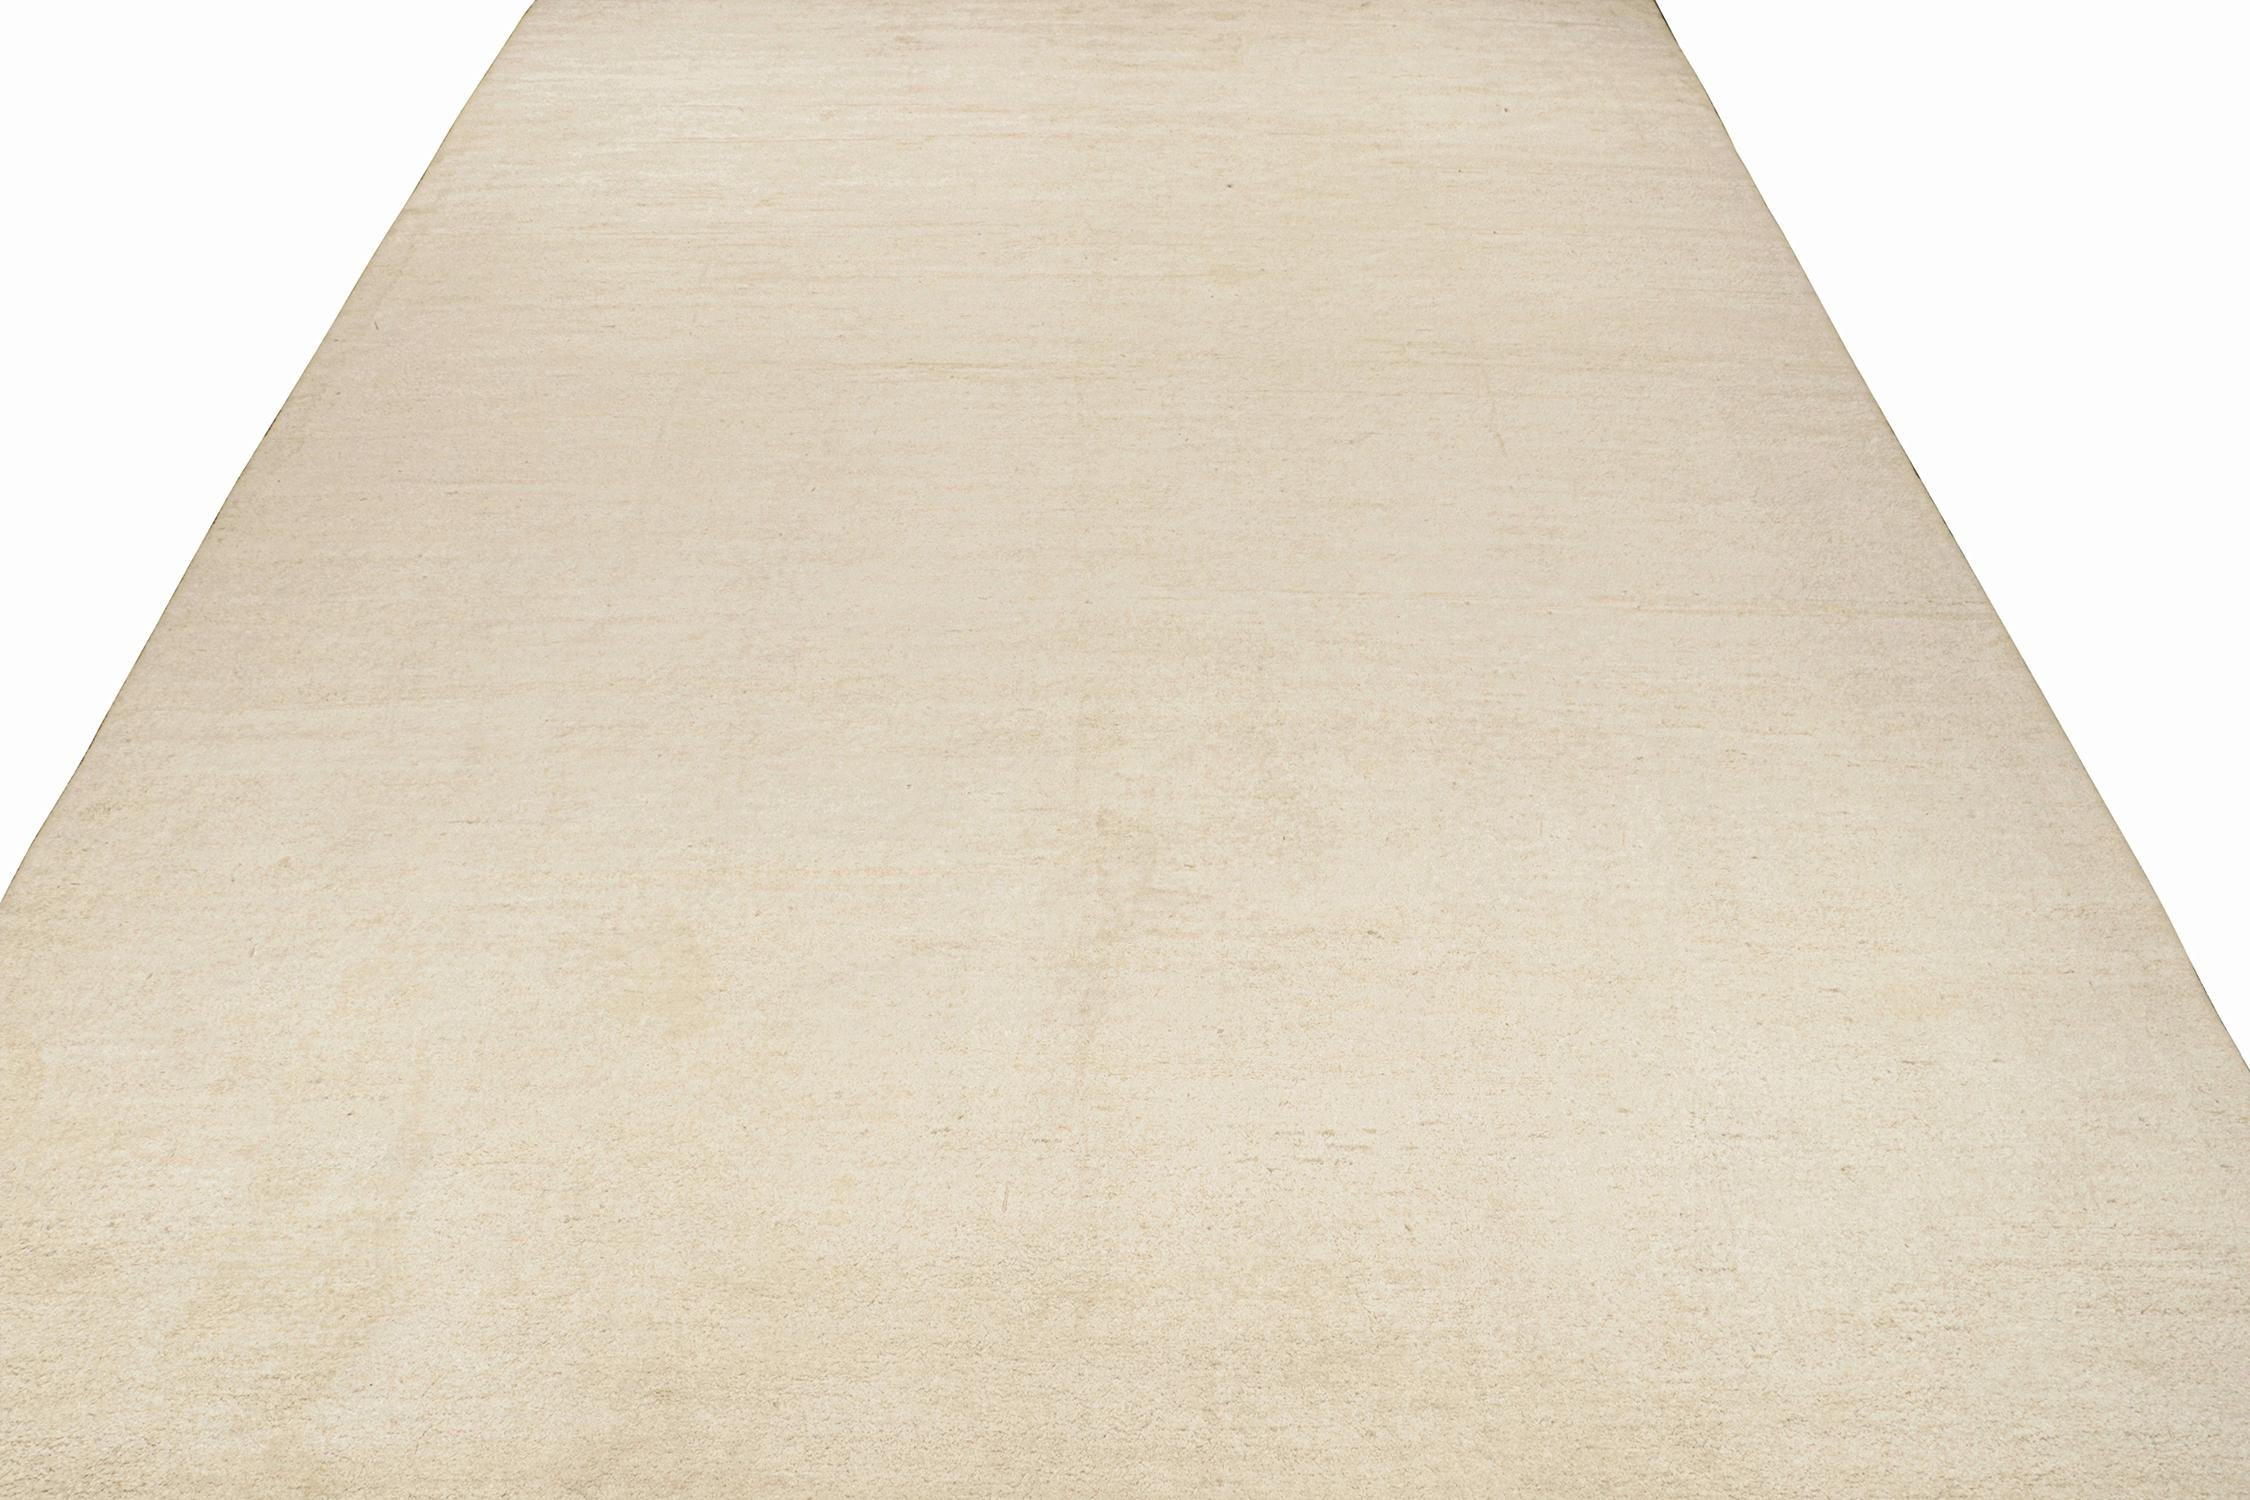 Modern Rug & Kilim’s Solid Beige-Brown Rug in Tone-on-tone Contemporary Style For Sale